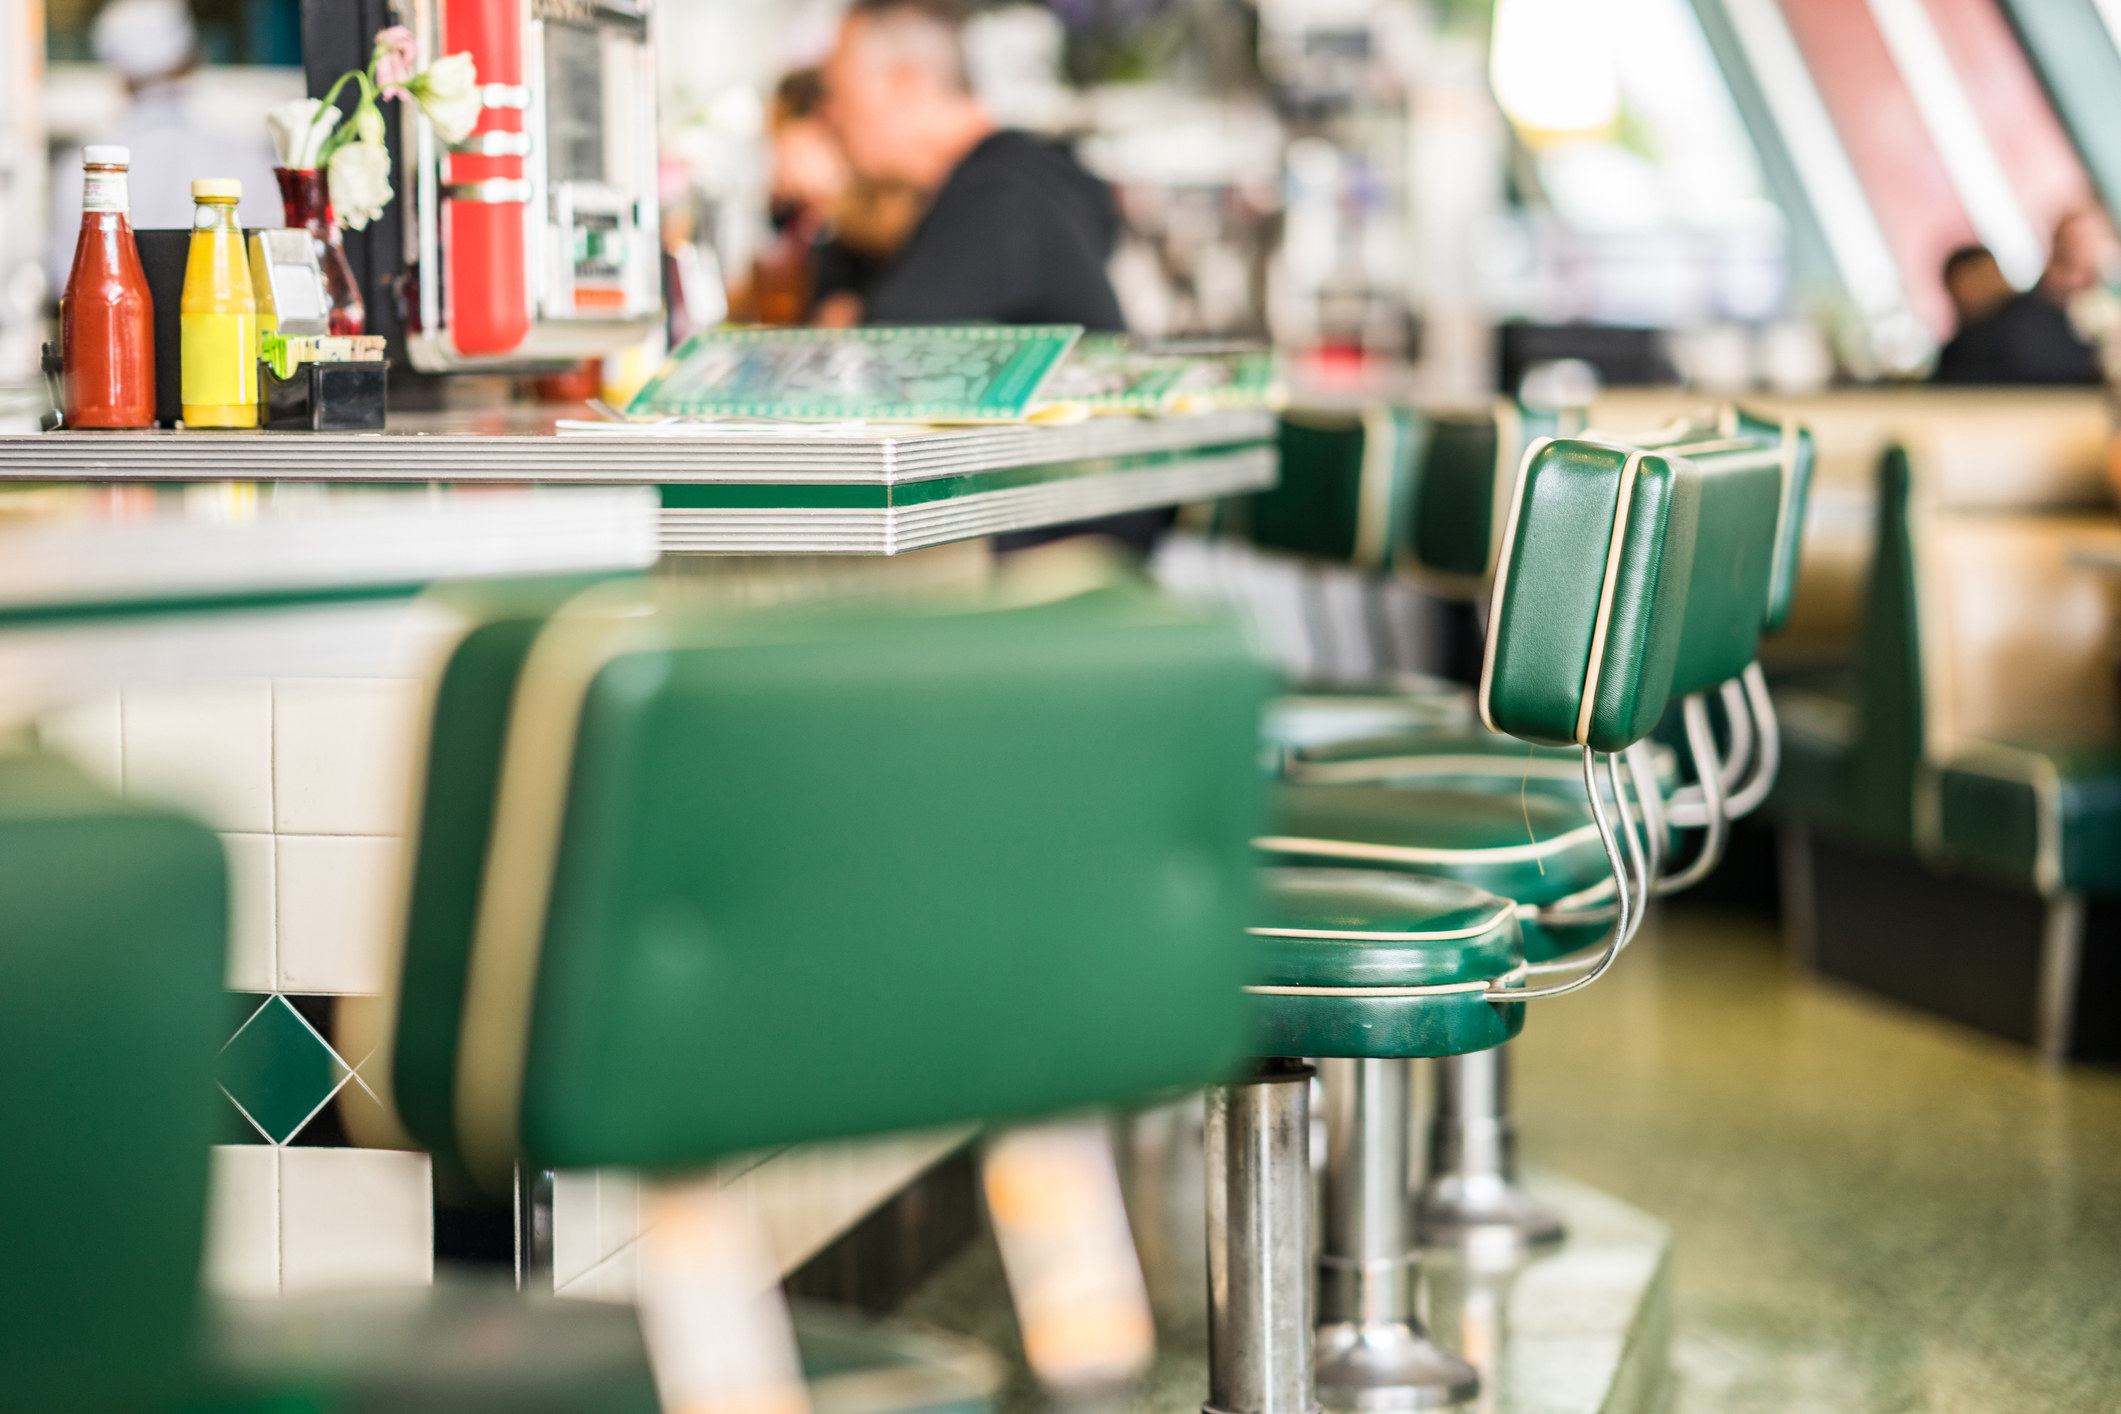 Vintage padded bar stools in an American diner.